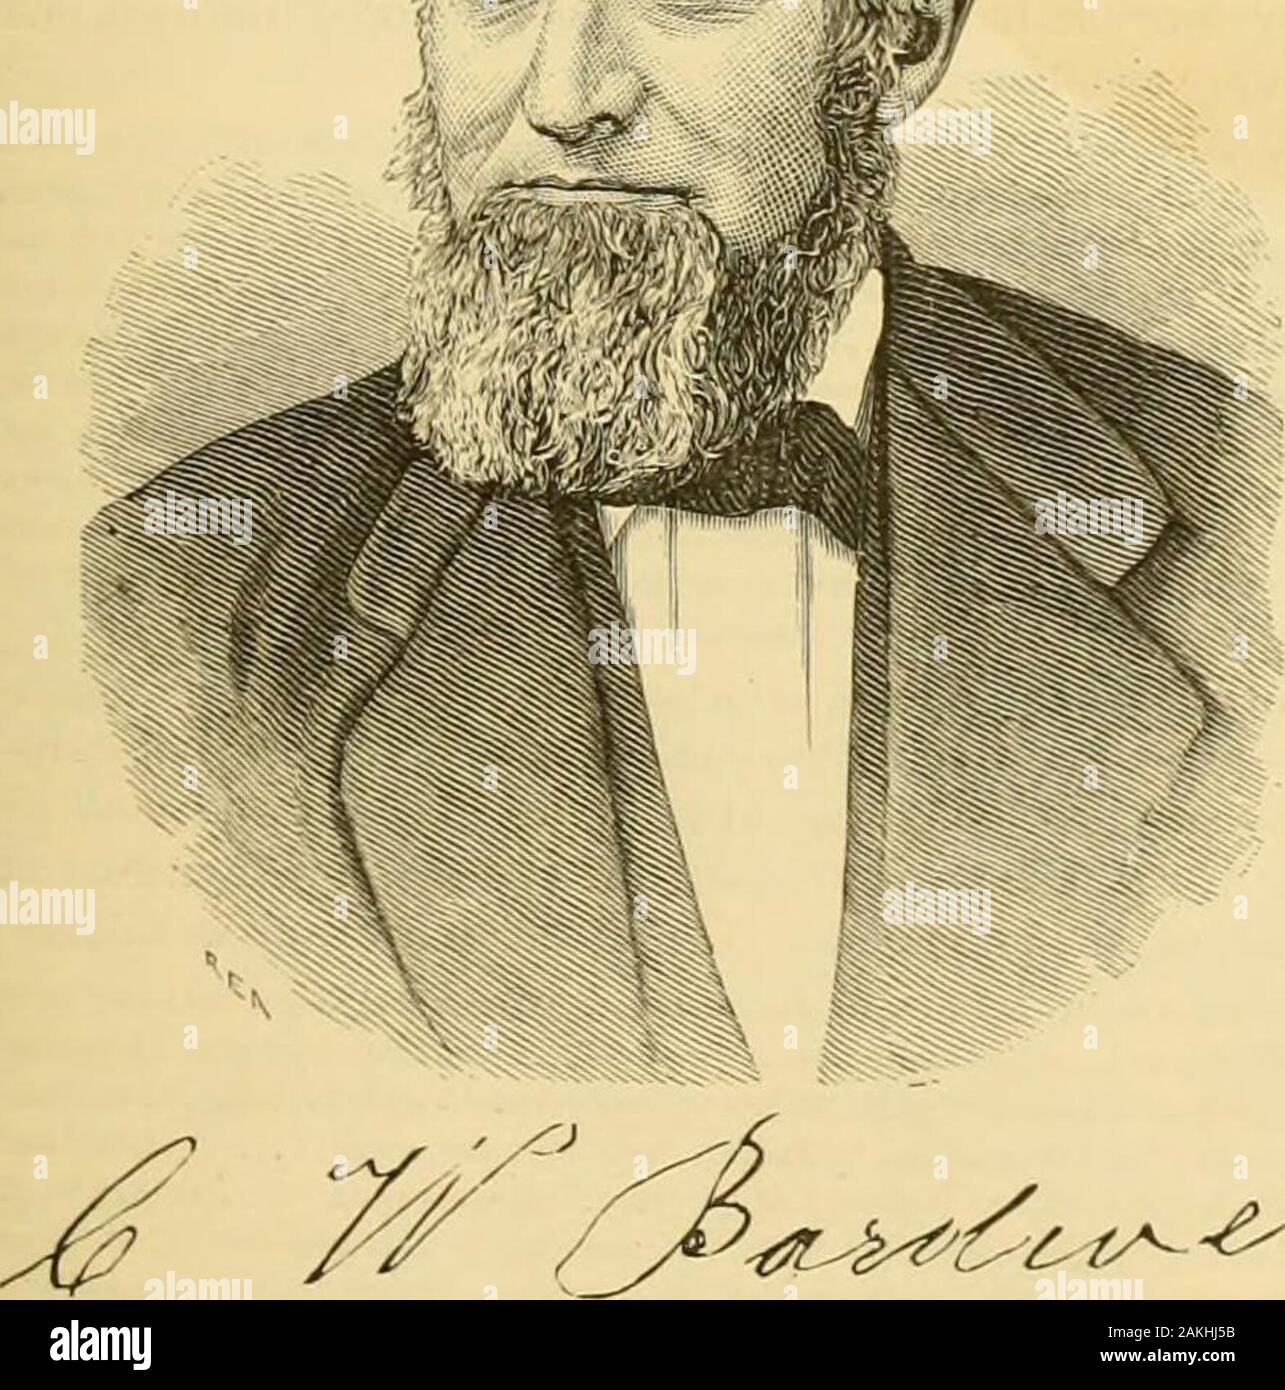 History of the Connecticut Valley in Massachusetts, with illustrations and biographical sketches of some of its prominent men and pioneers . .r»«^. S-. which he was engaged for manj years. In 1840 he removedto Ashfield, where he remained until his decease, which oc-curred on the 2d of November, 1878. For some tiiue previousto his death he was occupied in farming. He married for hisfirst wife (on the 19th of February, 1824) Dolly Hawks, whowas born in Deerficld, Jlass., on the 22d of January, 1795,and died in Shelburne, on the 7th of June, 1832. By thisunion he had four children, the oldest of Stock Photo